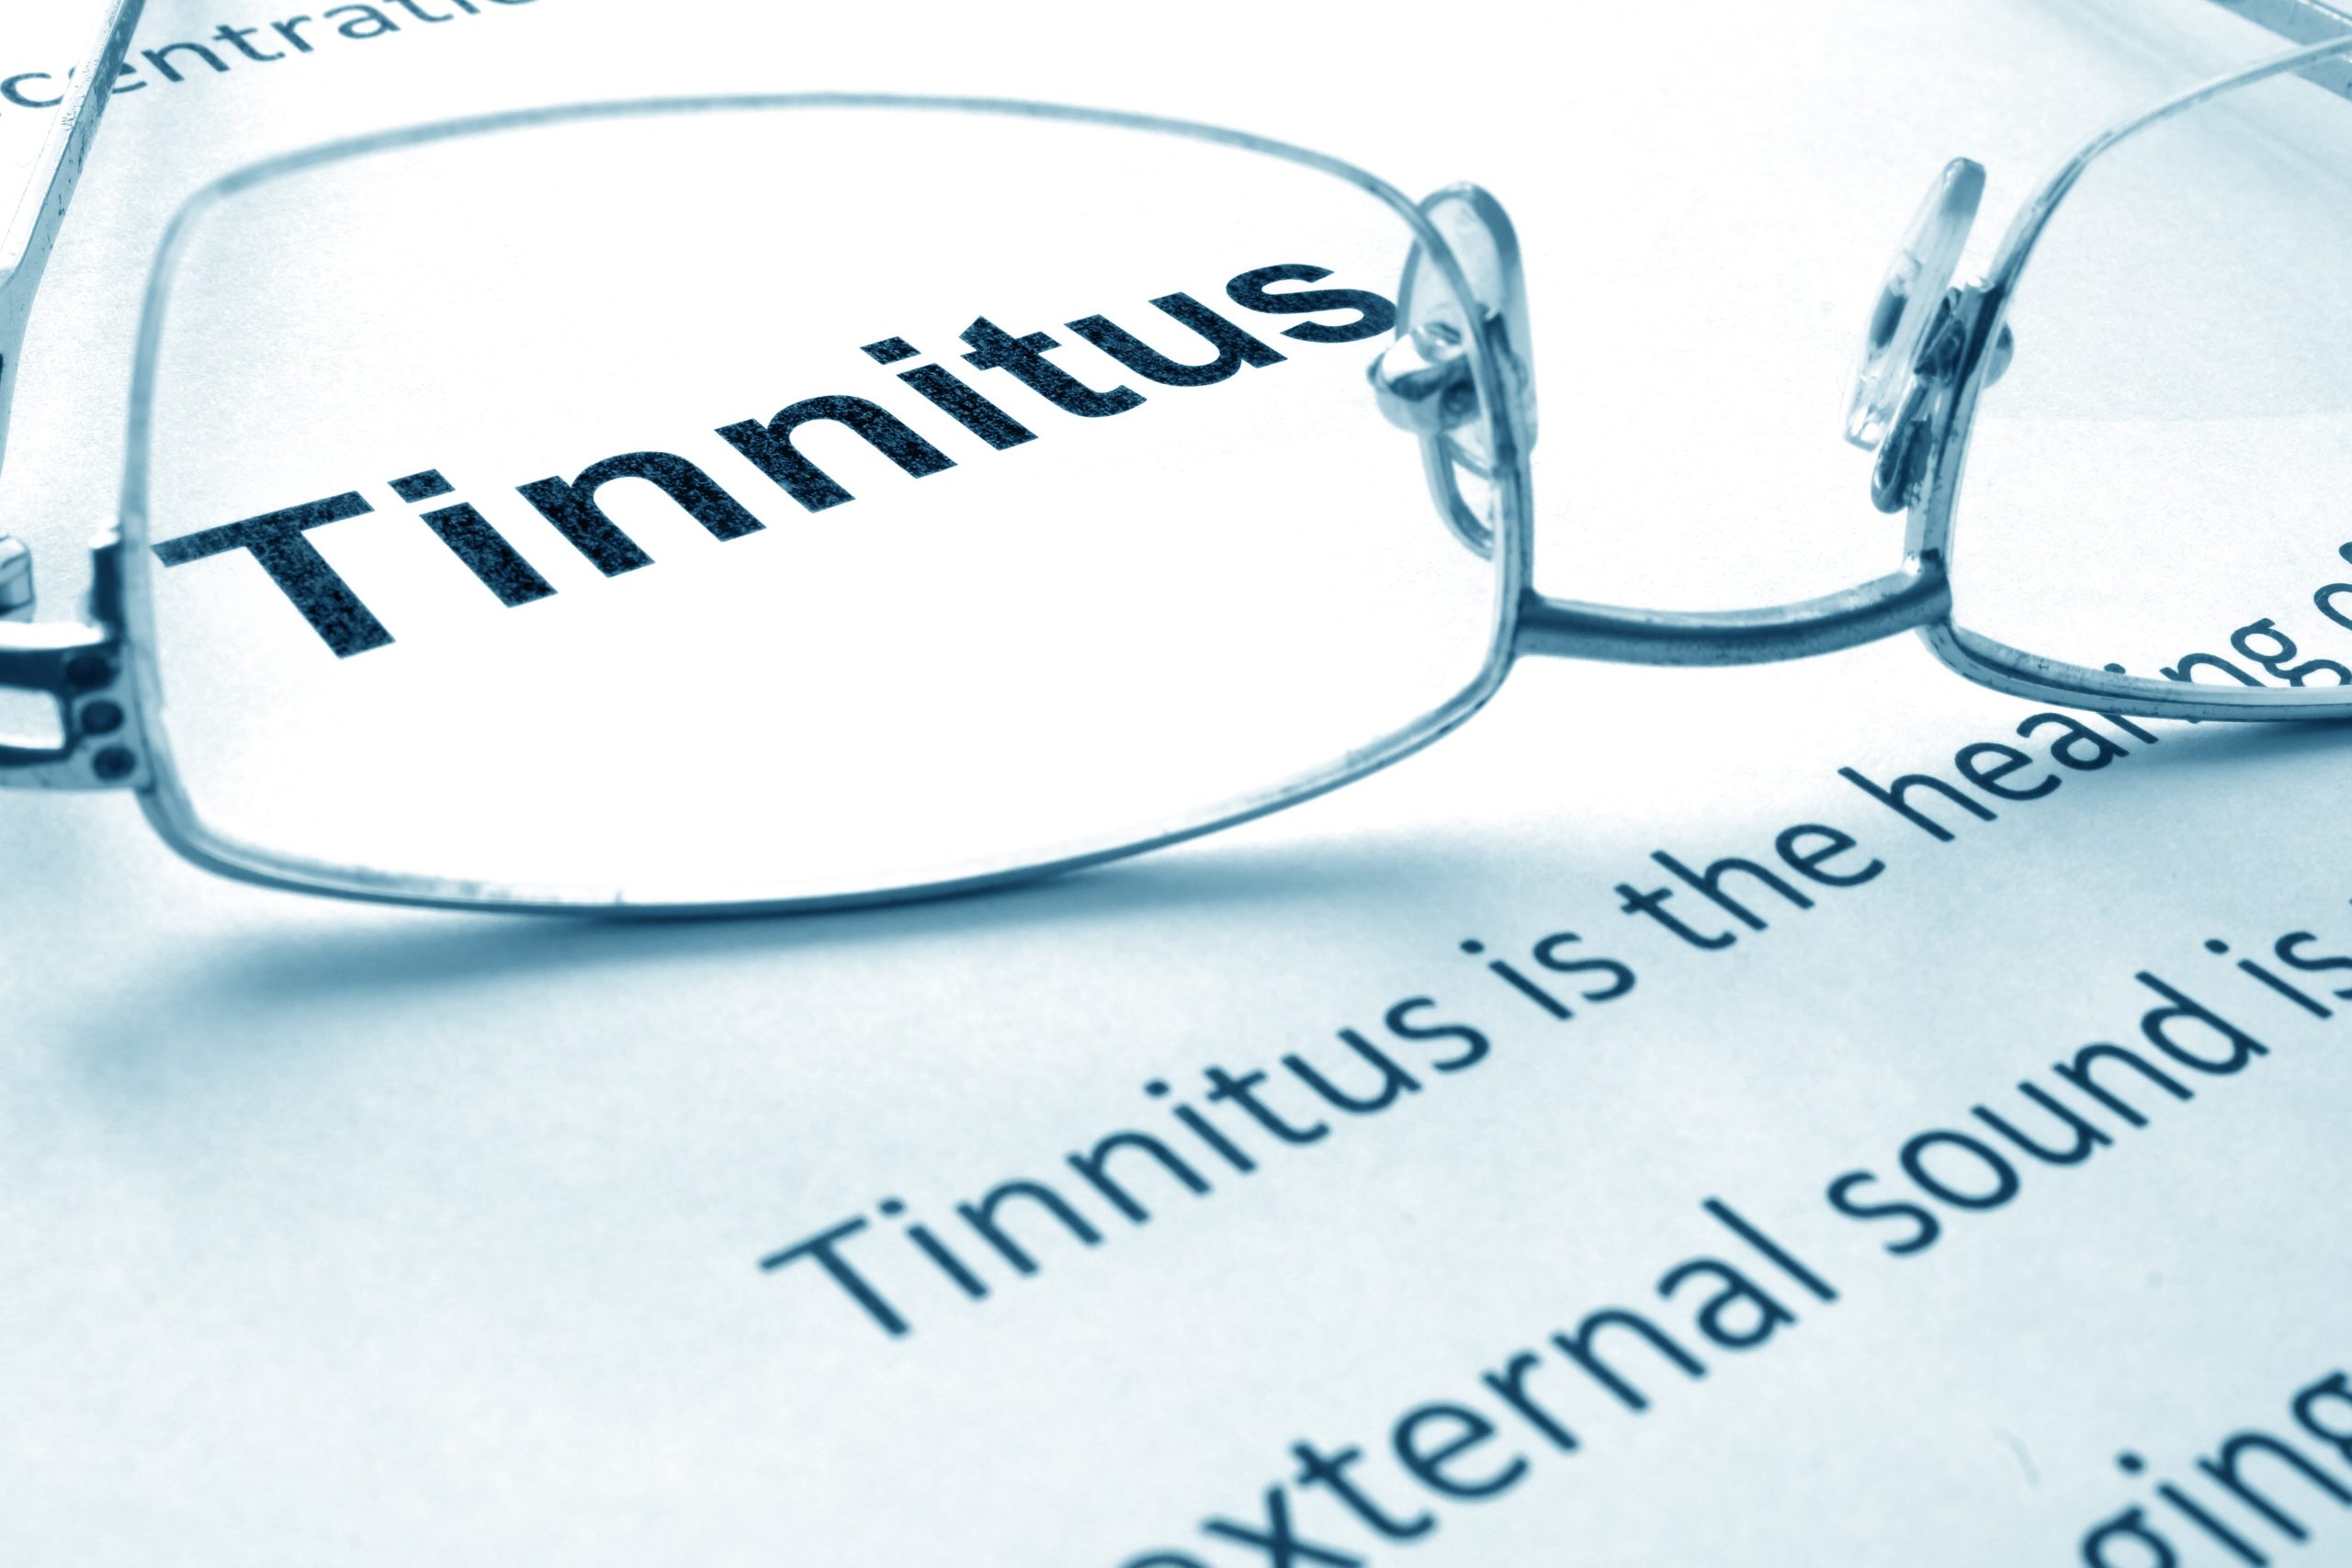 What is tinnitus?